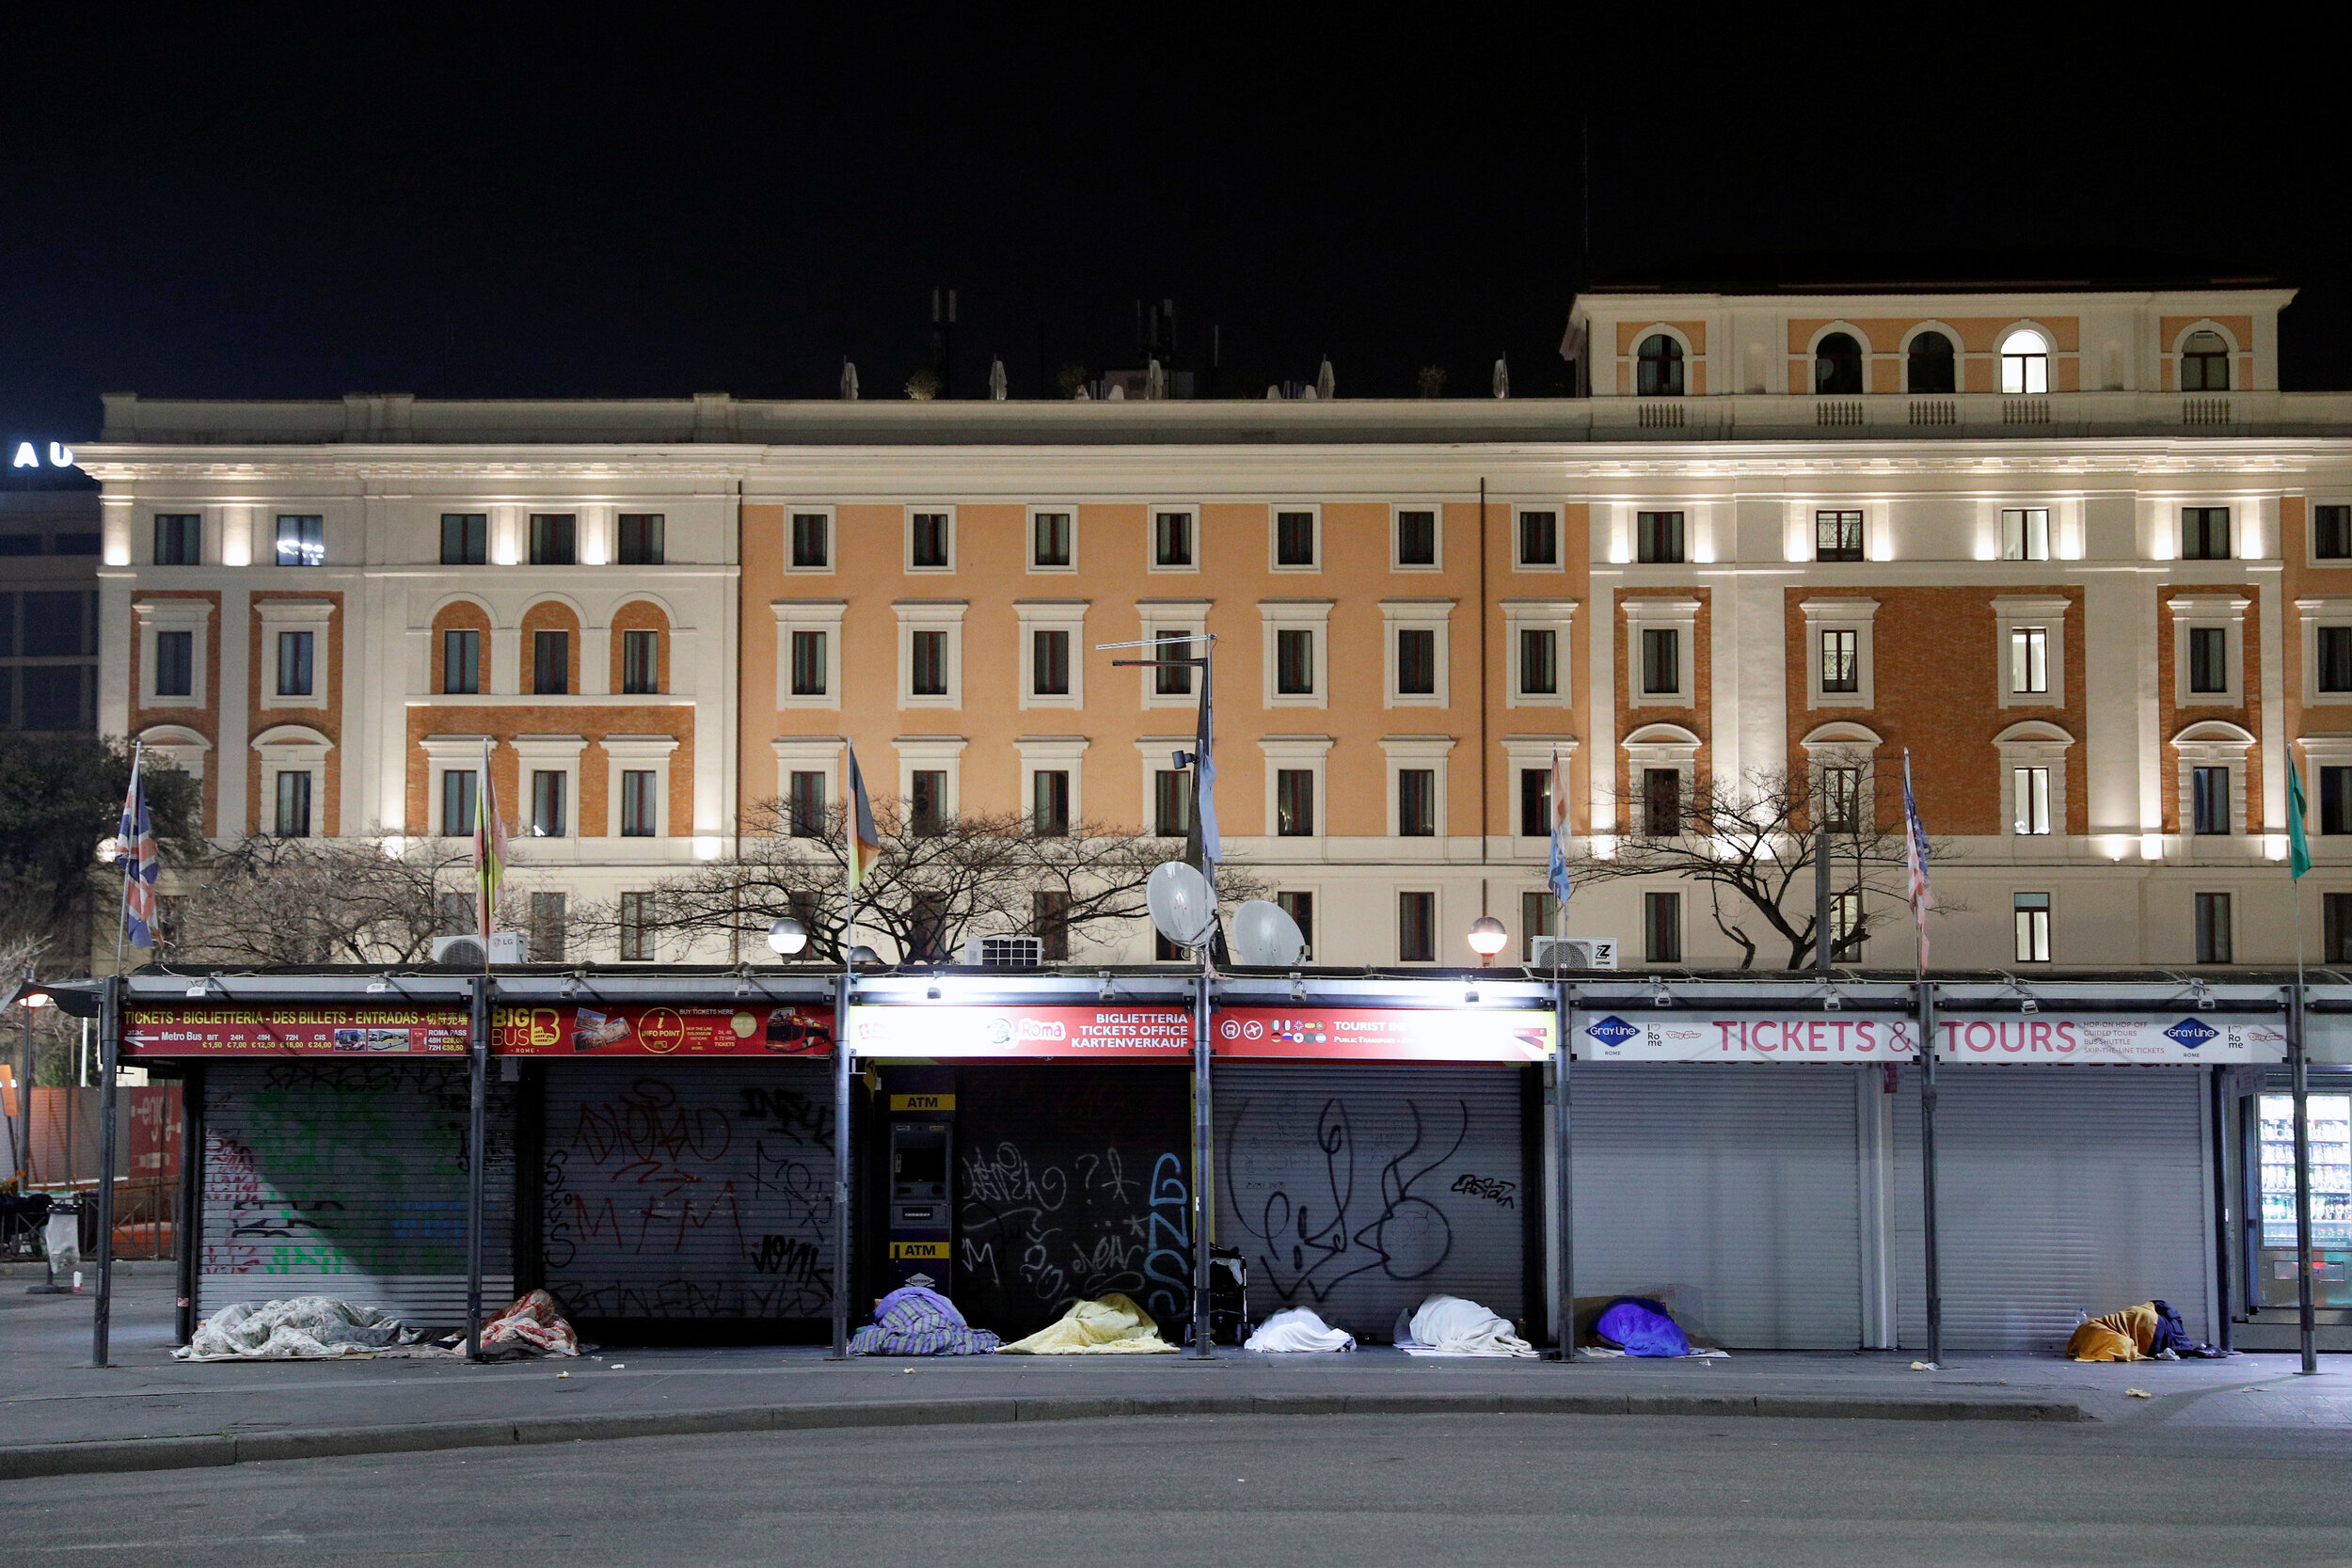  Homeless people sleep on a street in Rome, Italy, March 17, 2020. Since the coronavirus crisis, Red Cross workers have been increasing their daily activities to meet the growing needs of the homeless in Rome. 